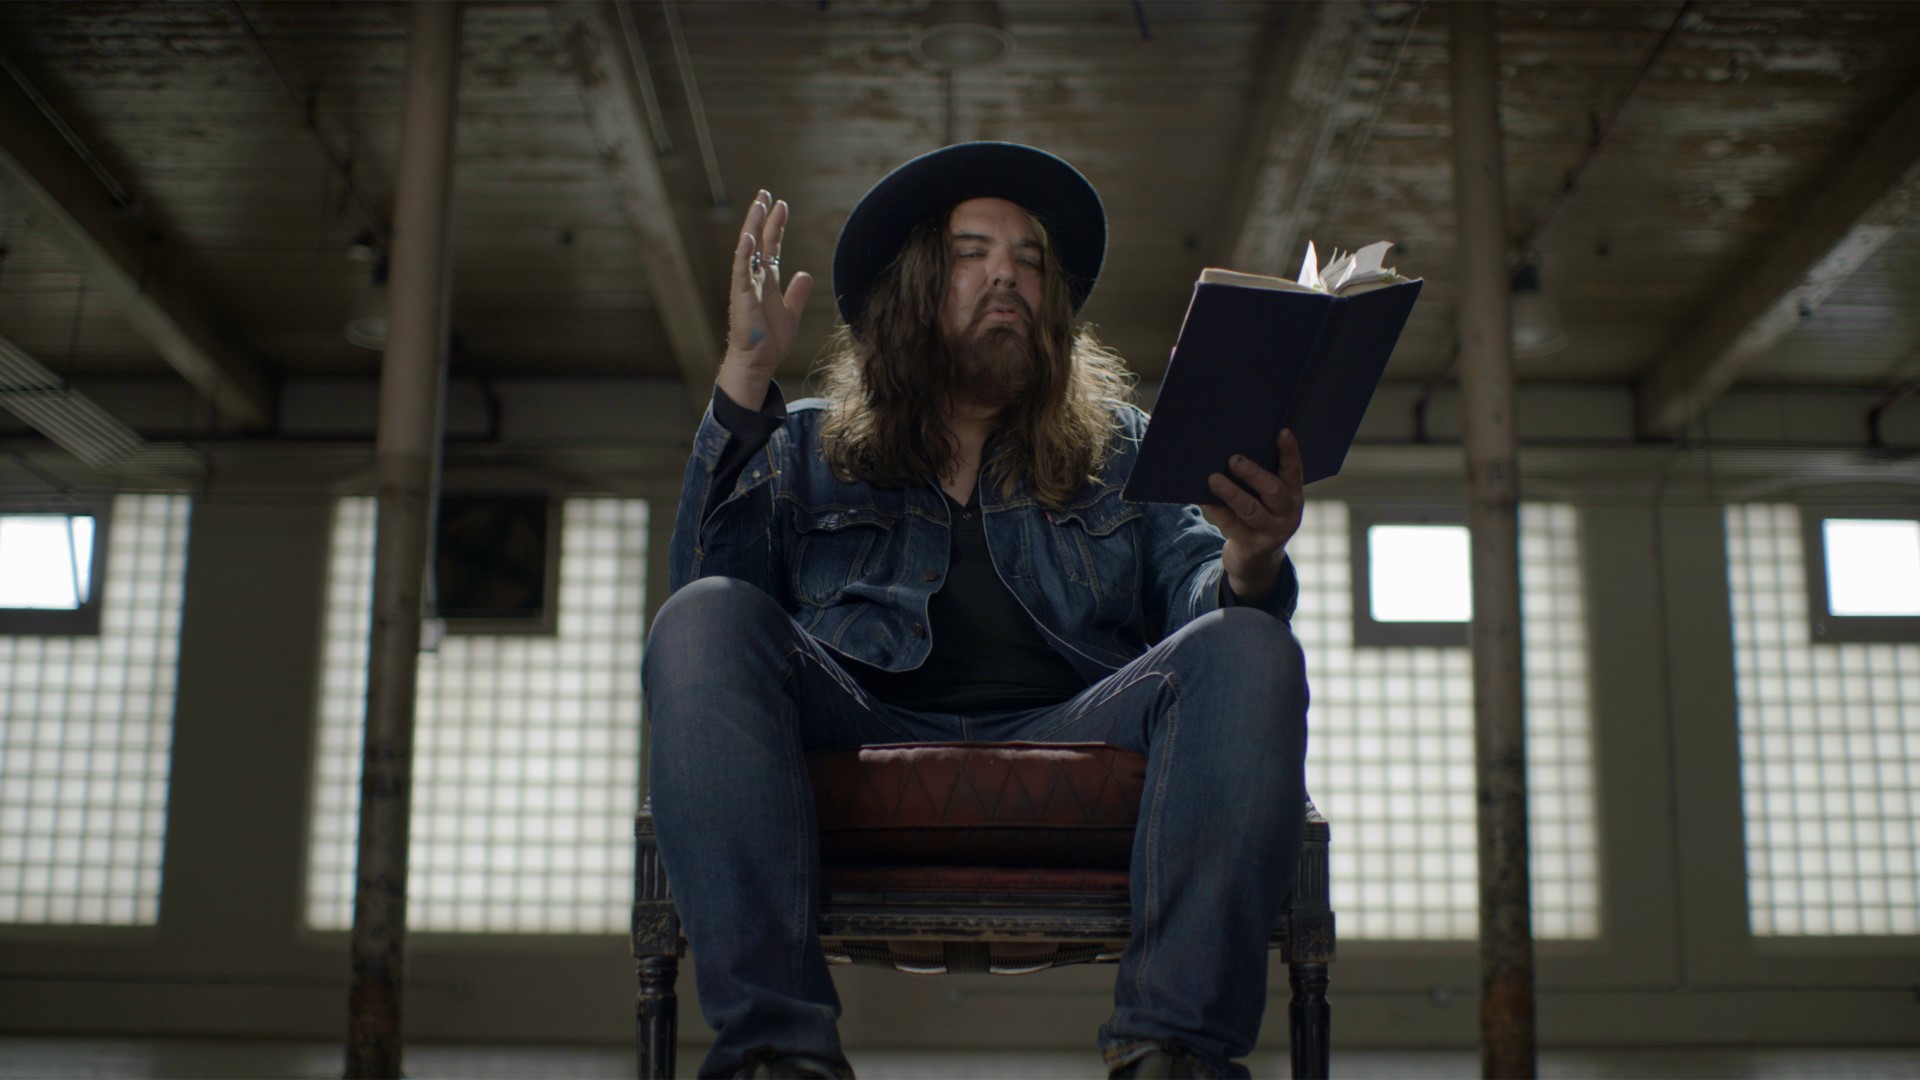 a man reading from abook